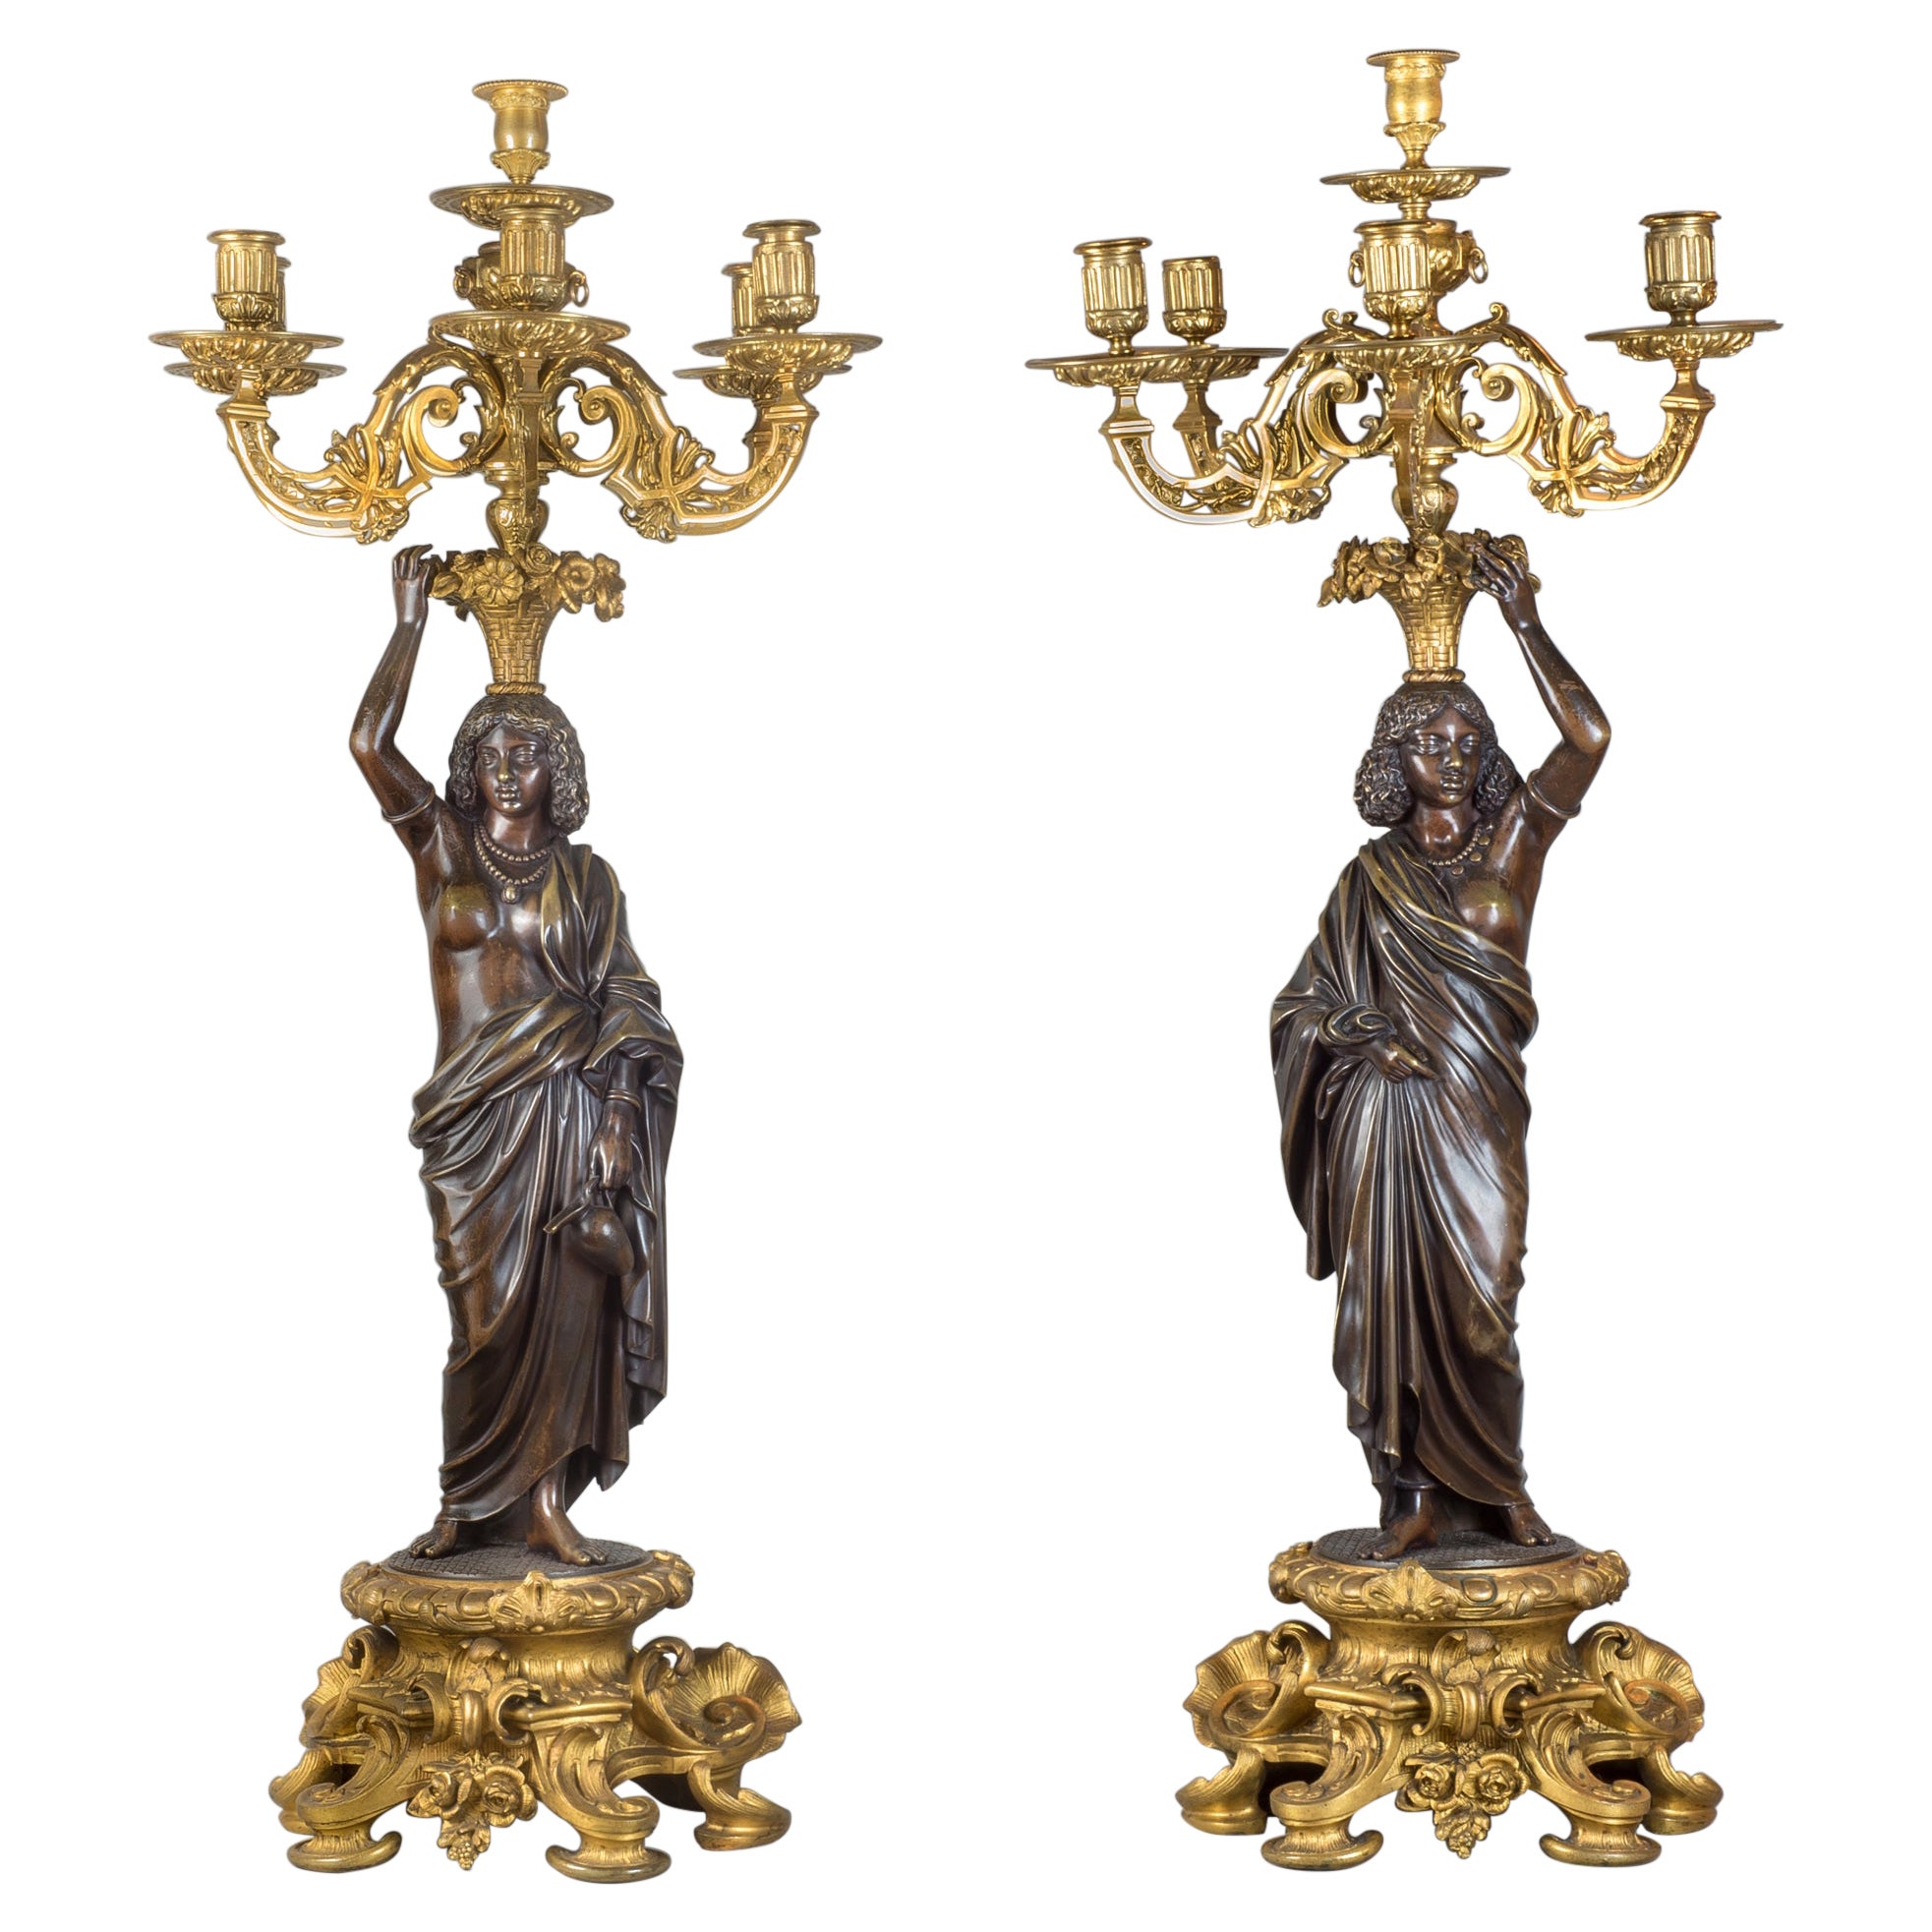  Pair of Gilt and Patinated Bronze Nubian Figural Six-Light Candelabras